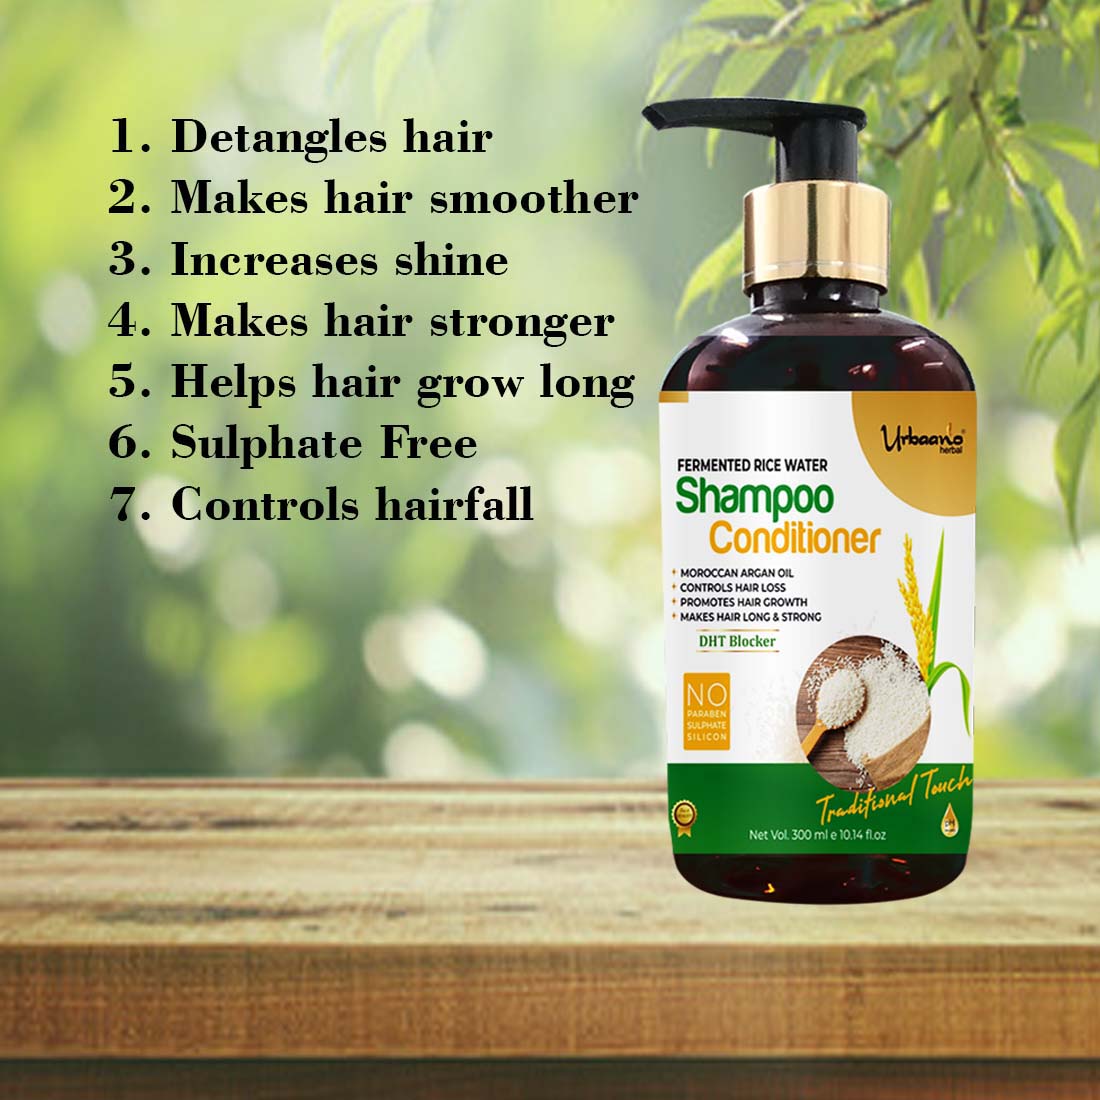 urbaano herbal hair care kit hot deal special offer Hair growth oil & rice shampoo sulphate free